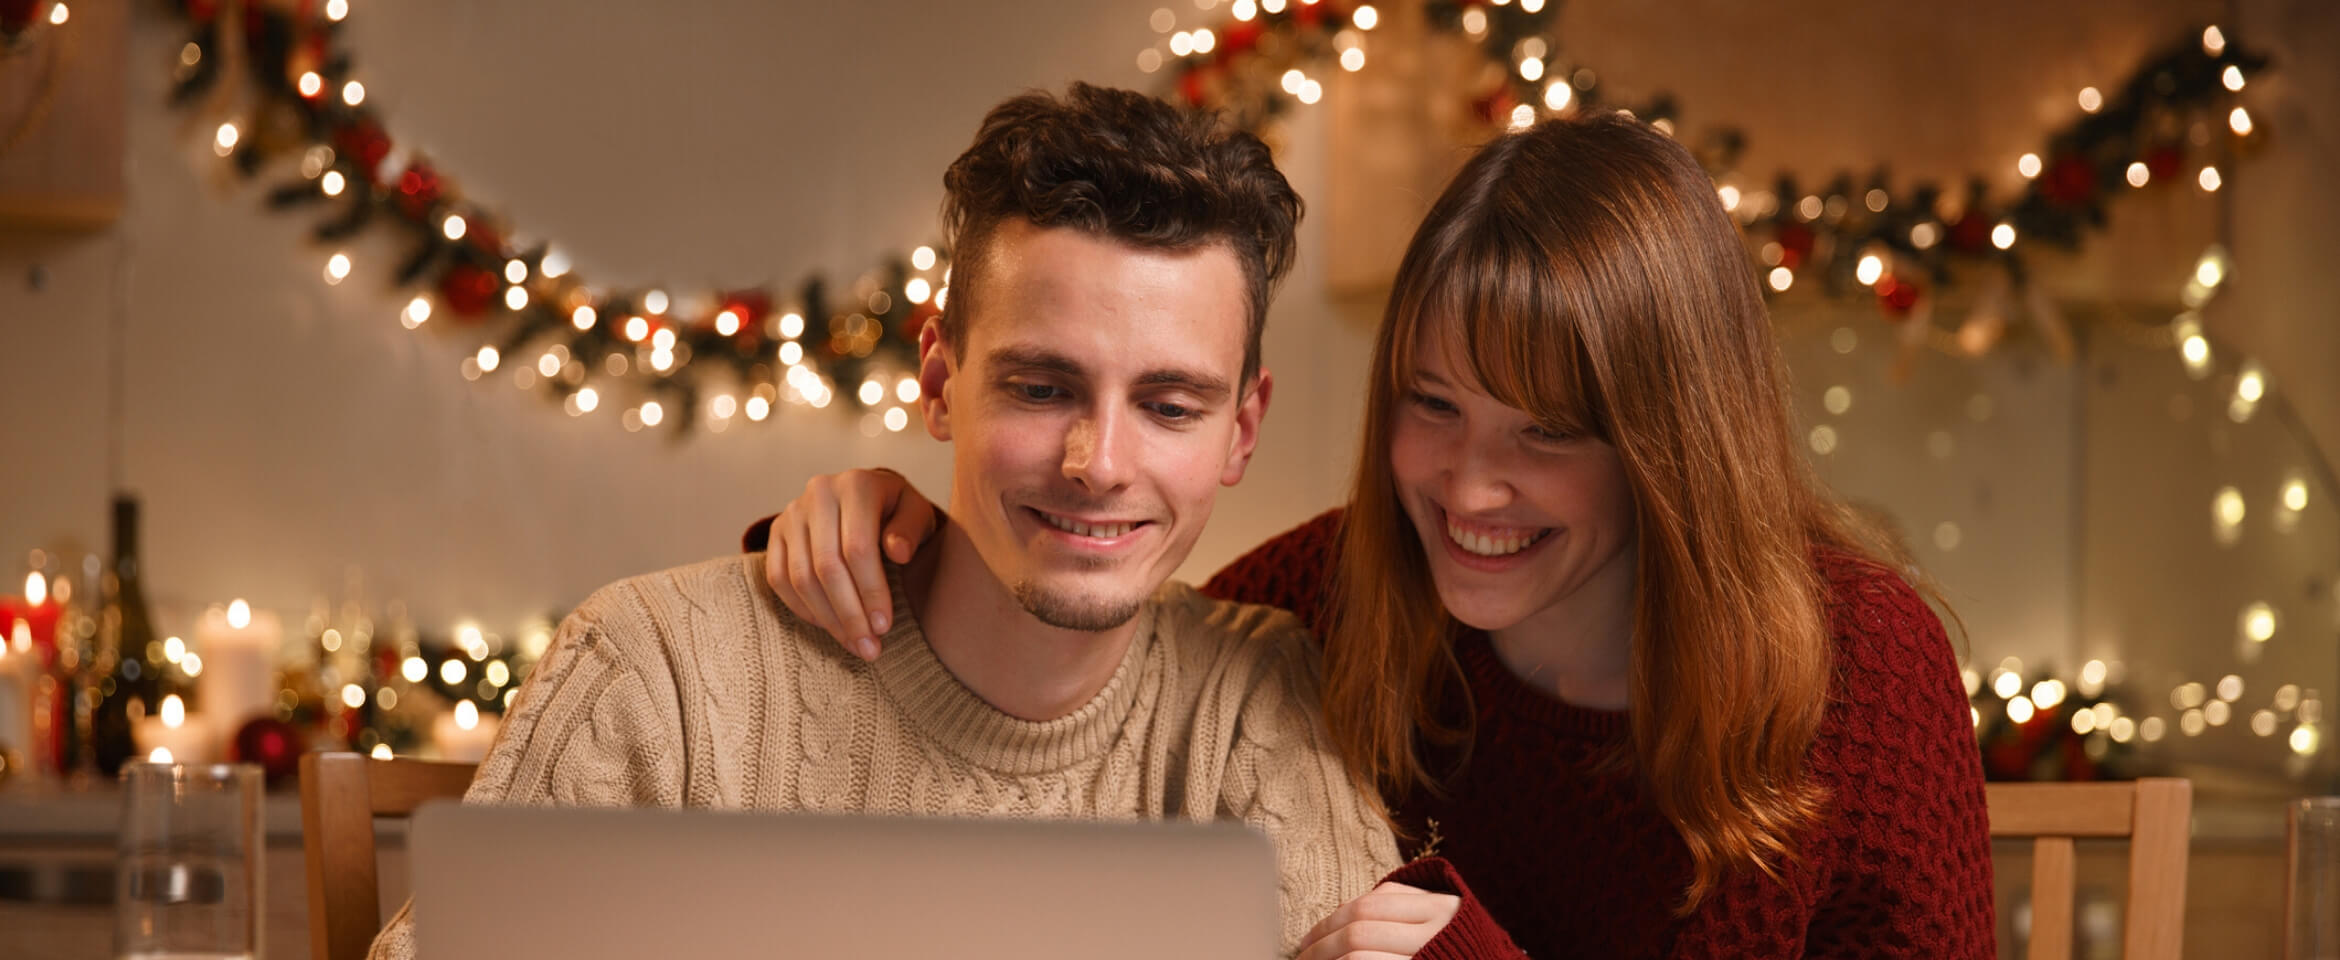 Affiliate Marketing during the Holiday Season